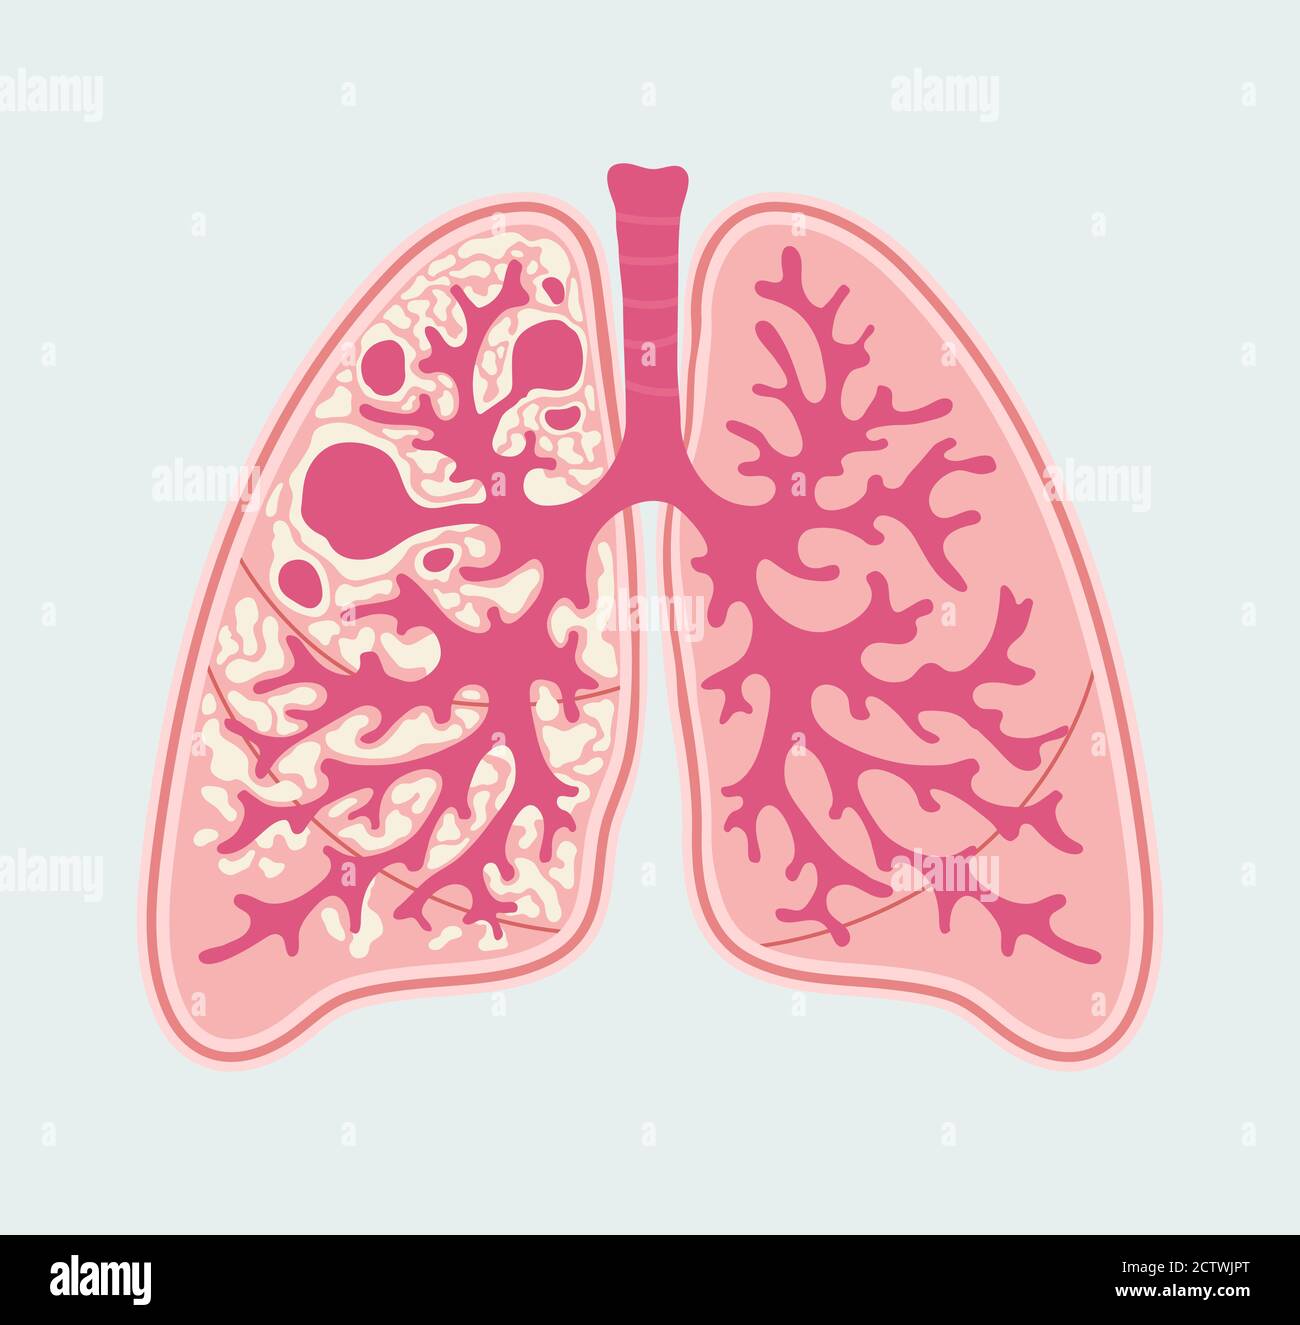 Patient-friendly scheme of TB damages in human lung. Anatomical Diagram of Tuberculosis. Respiratory system diseases Stock Vector